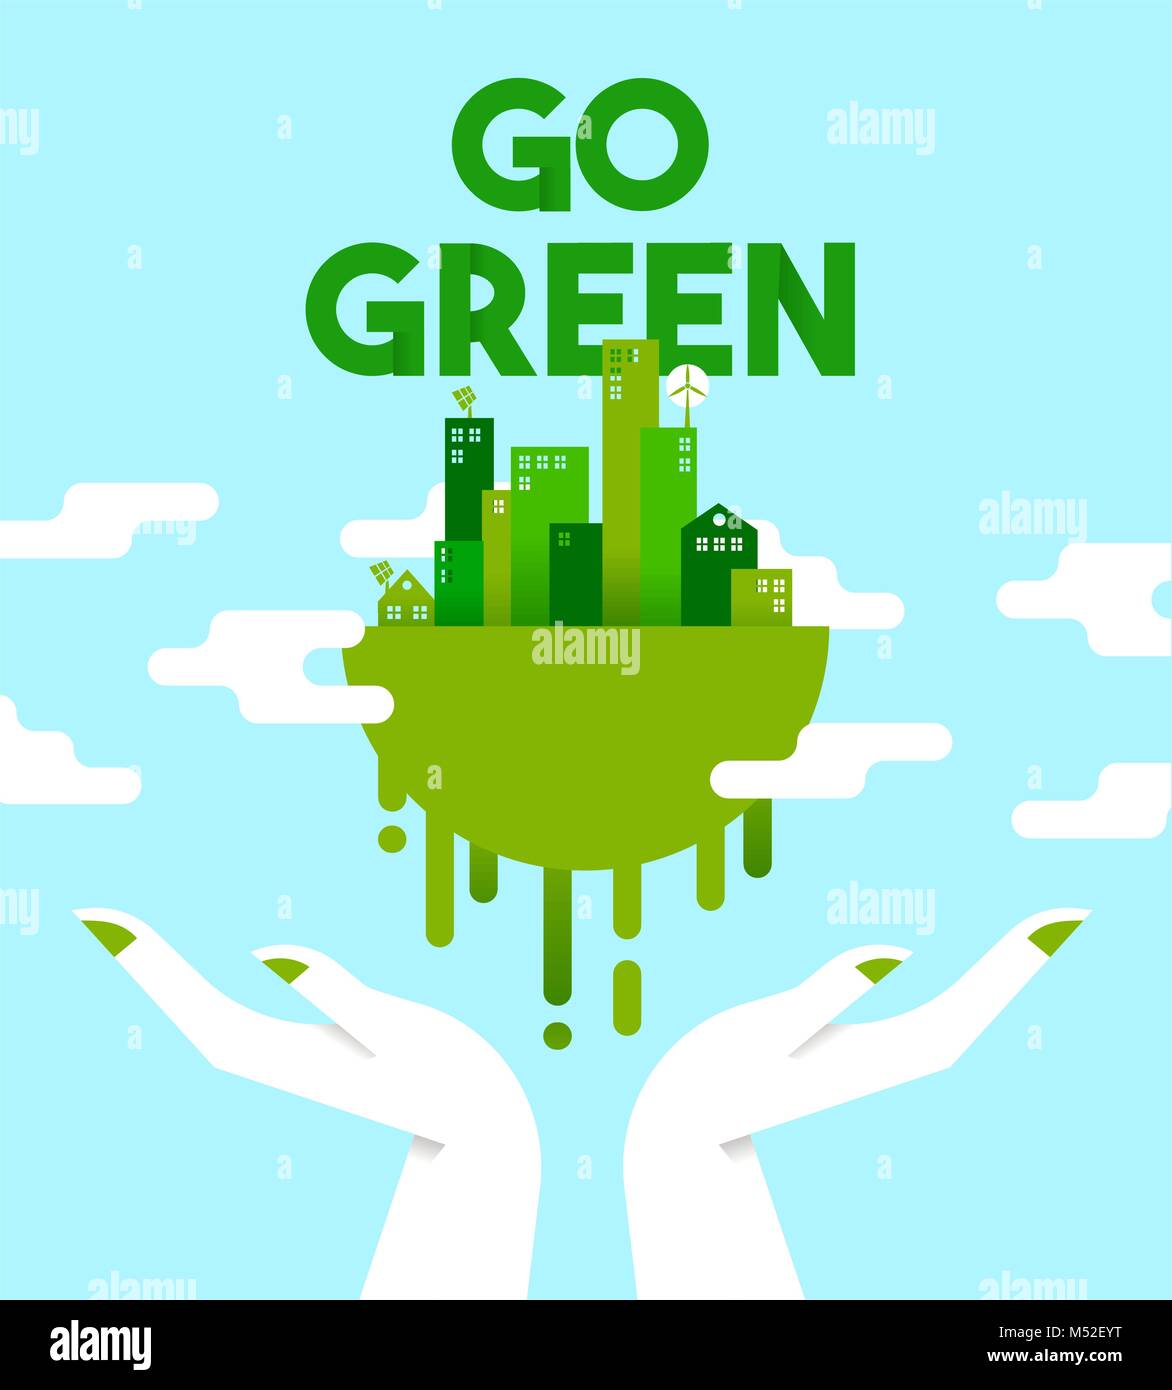 Go green concept illustration, human hands holding planet earth with houses and towers in flat art style for environmental care. EPS10 vector. Stock Vector